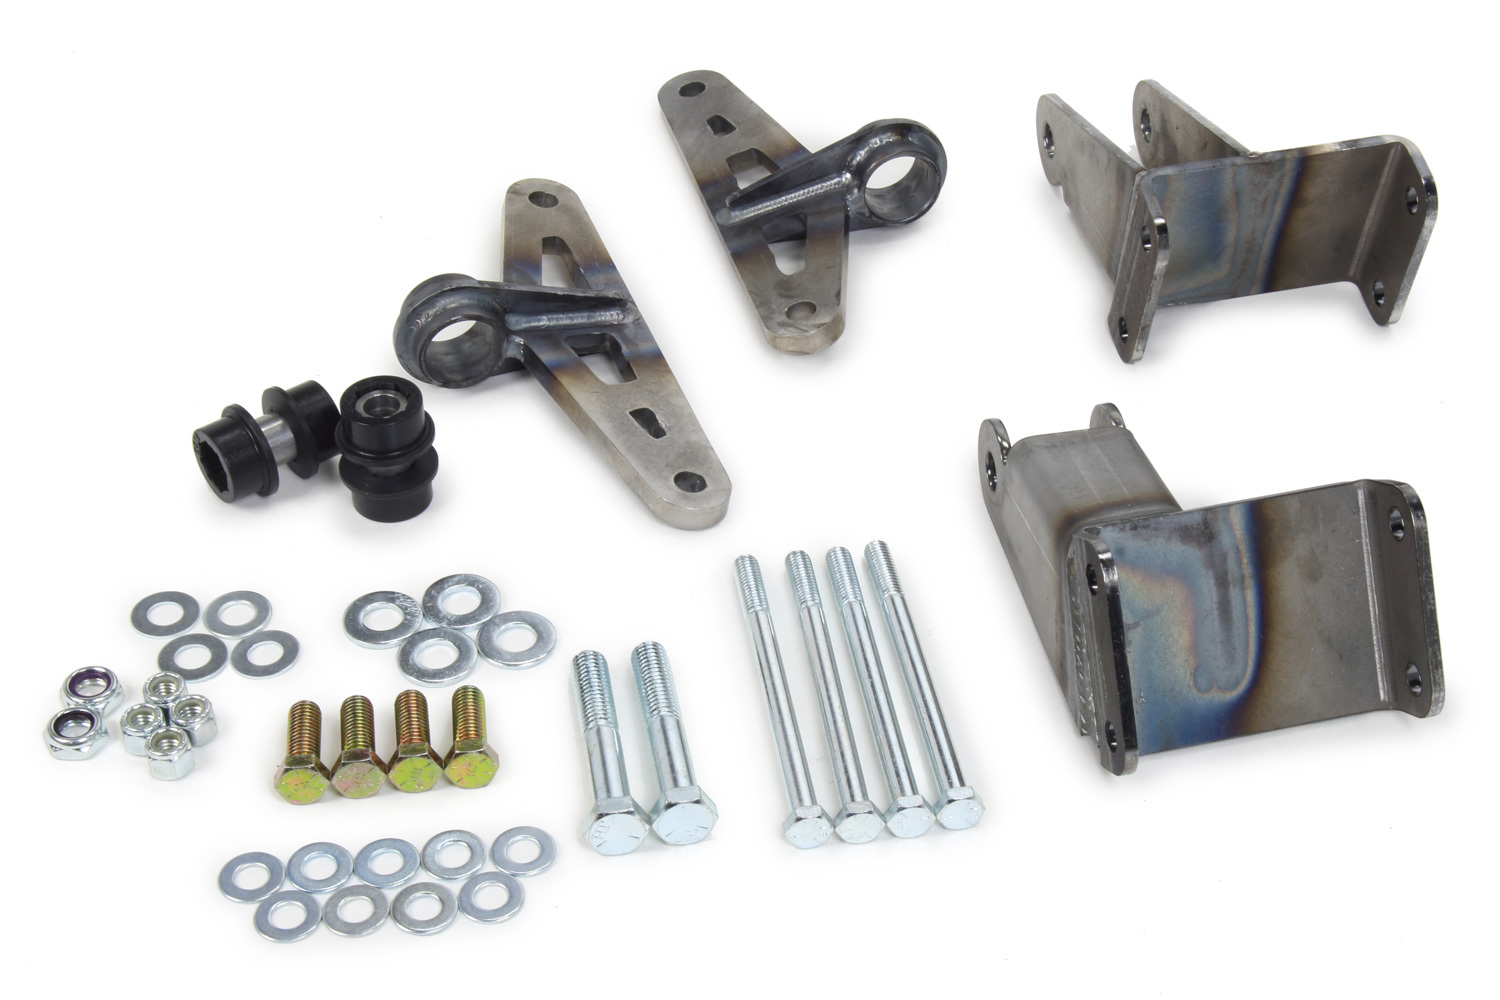 Heidts Rod Shop MM-263 Motor Mount, Bolt-On, Bushings / Hardware Included, Steel, Natural, Small Block Ford, Ford Mustang 1964-70, Kit